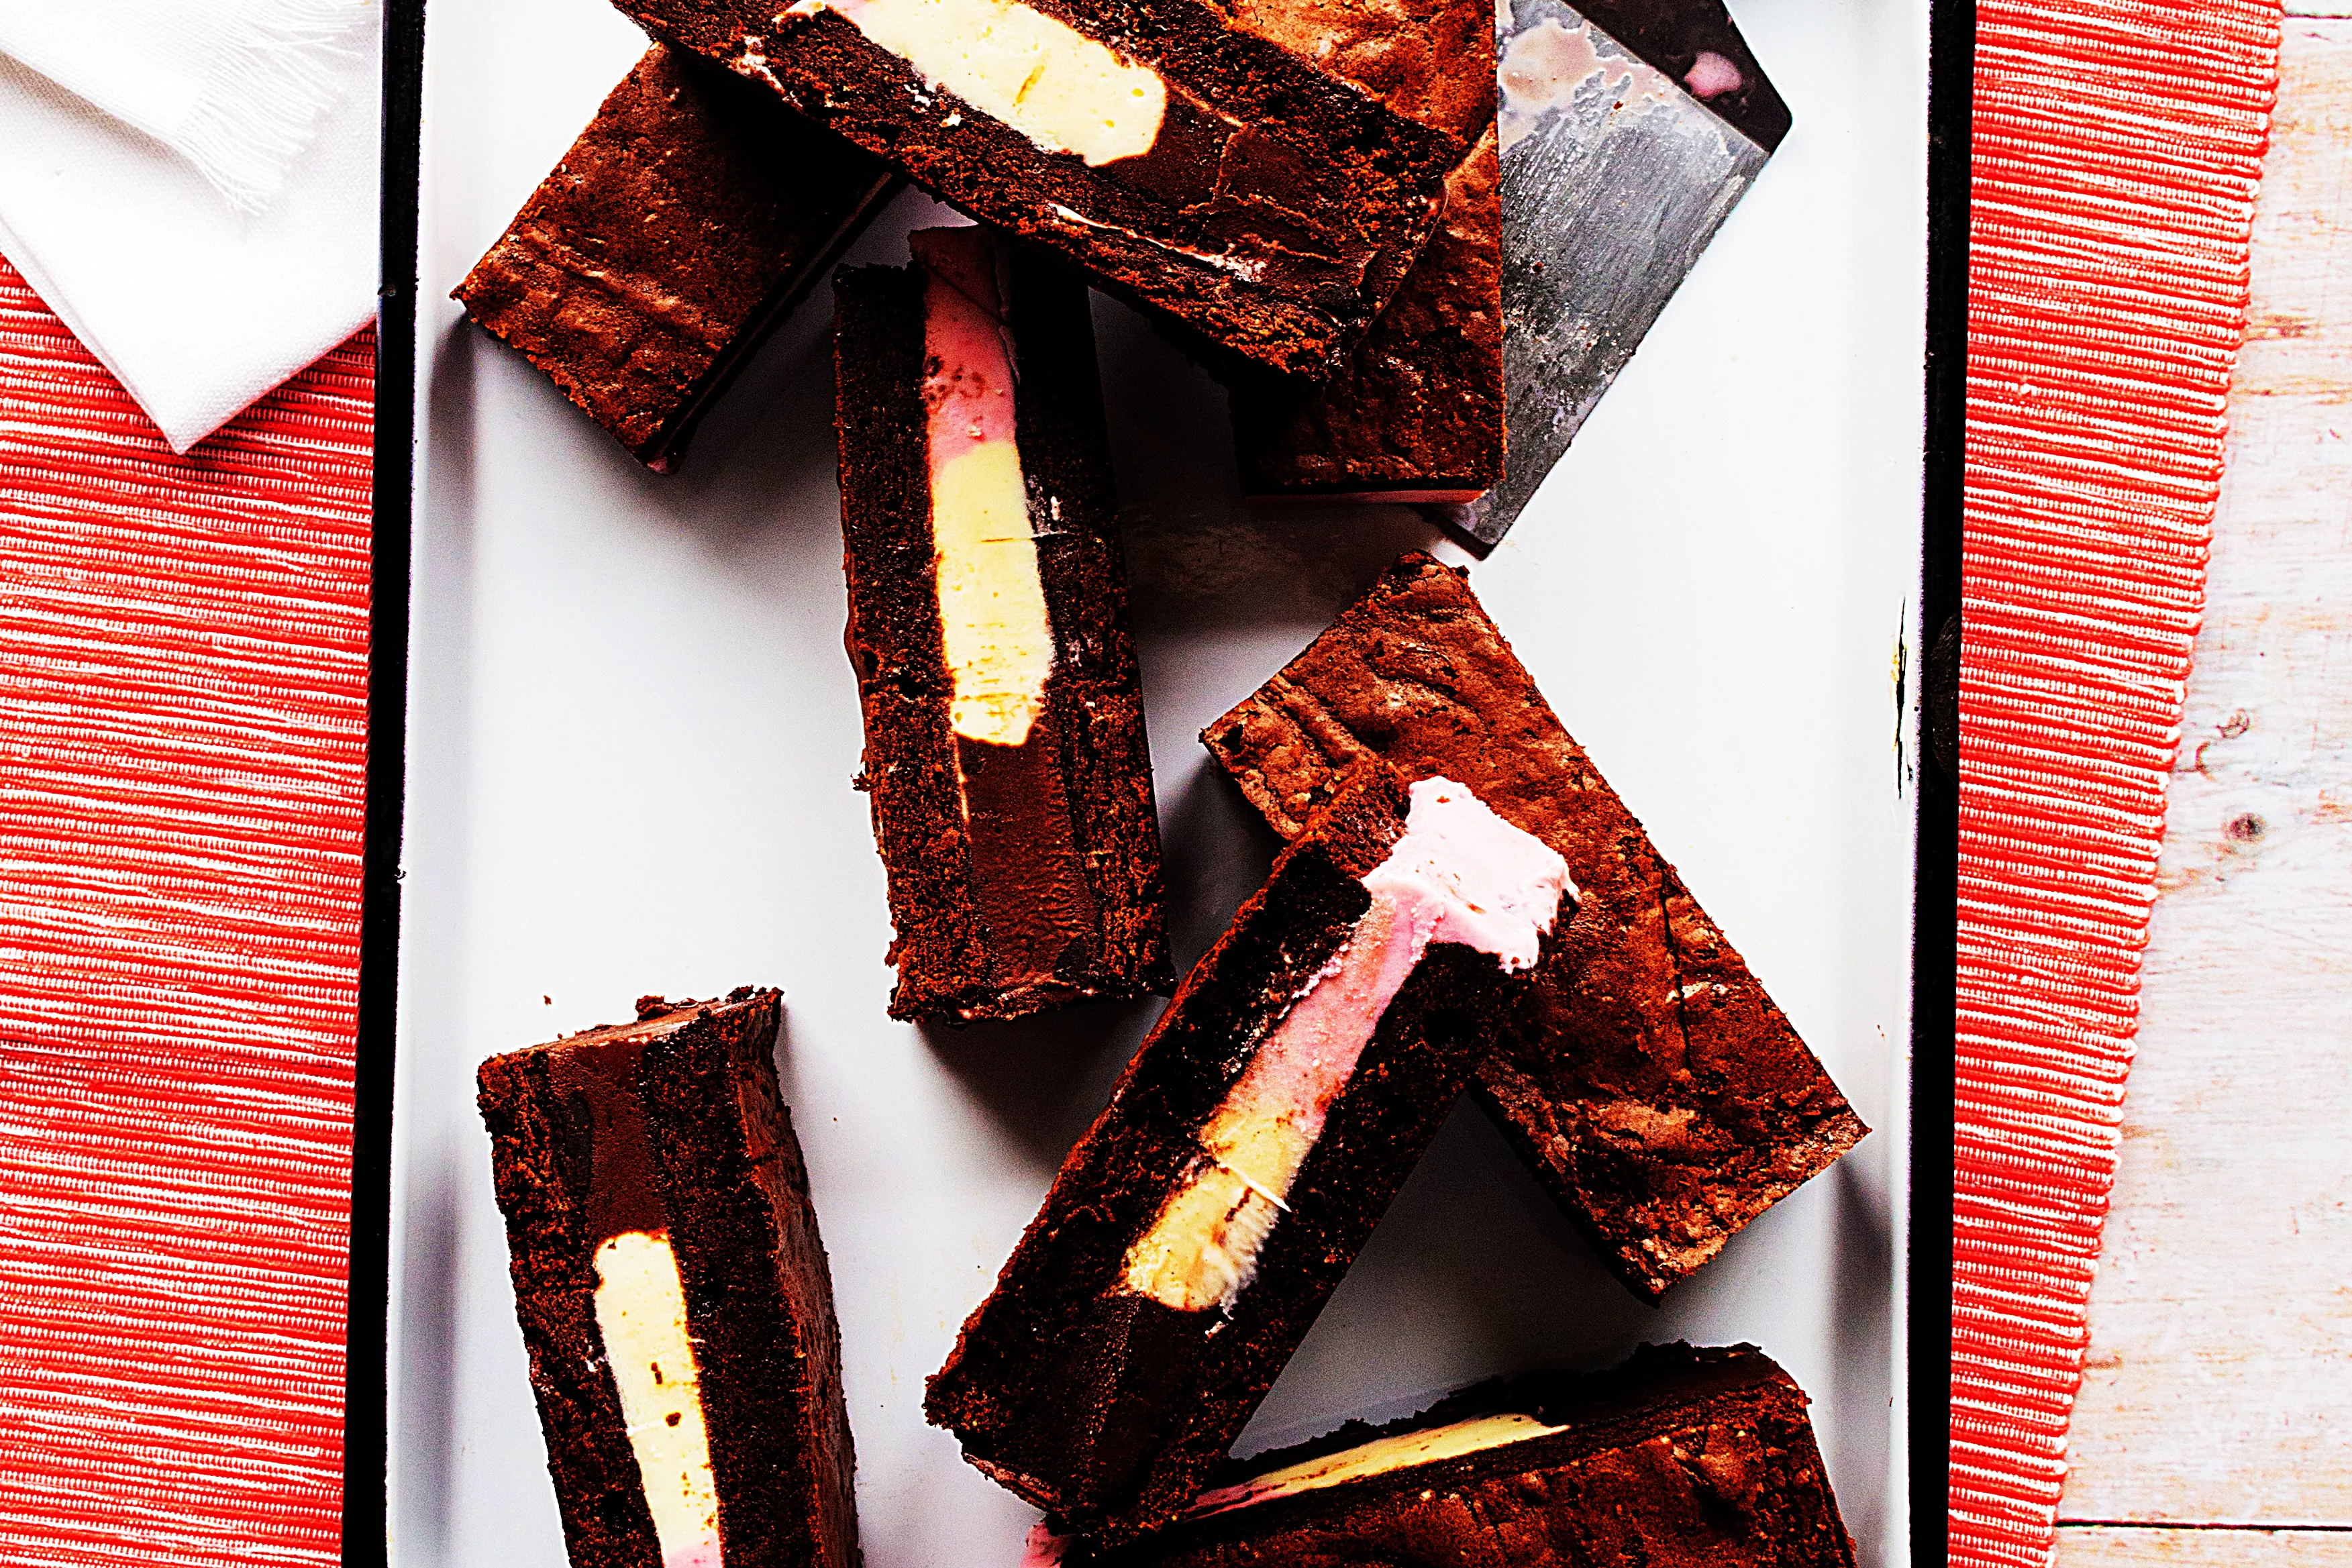 Stupid-Easy Recipe for Neapolitan Brownie Ice Cream Sandwiches (#1 Top-Rated)